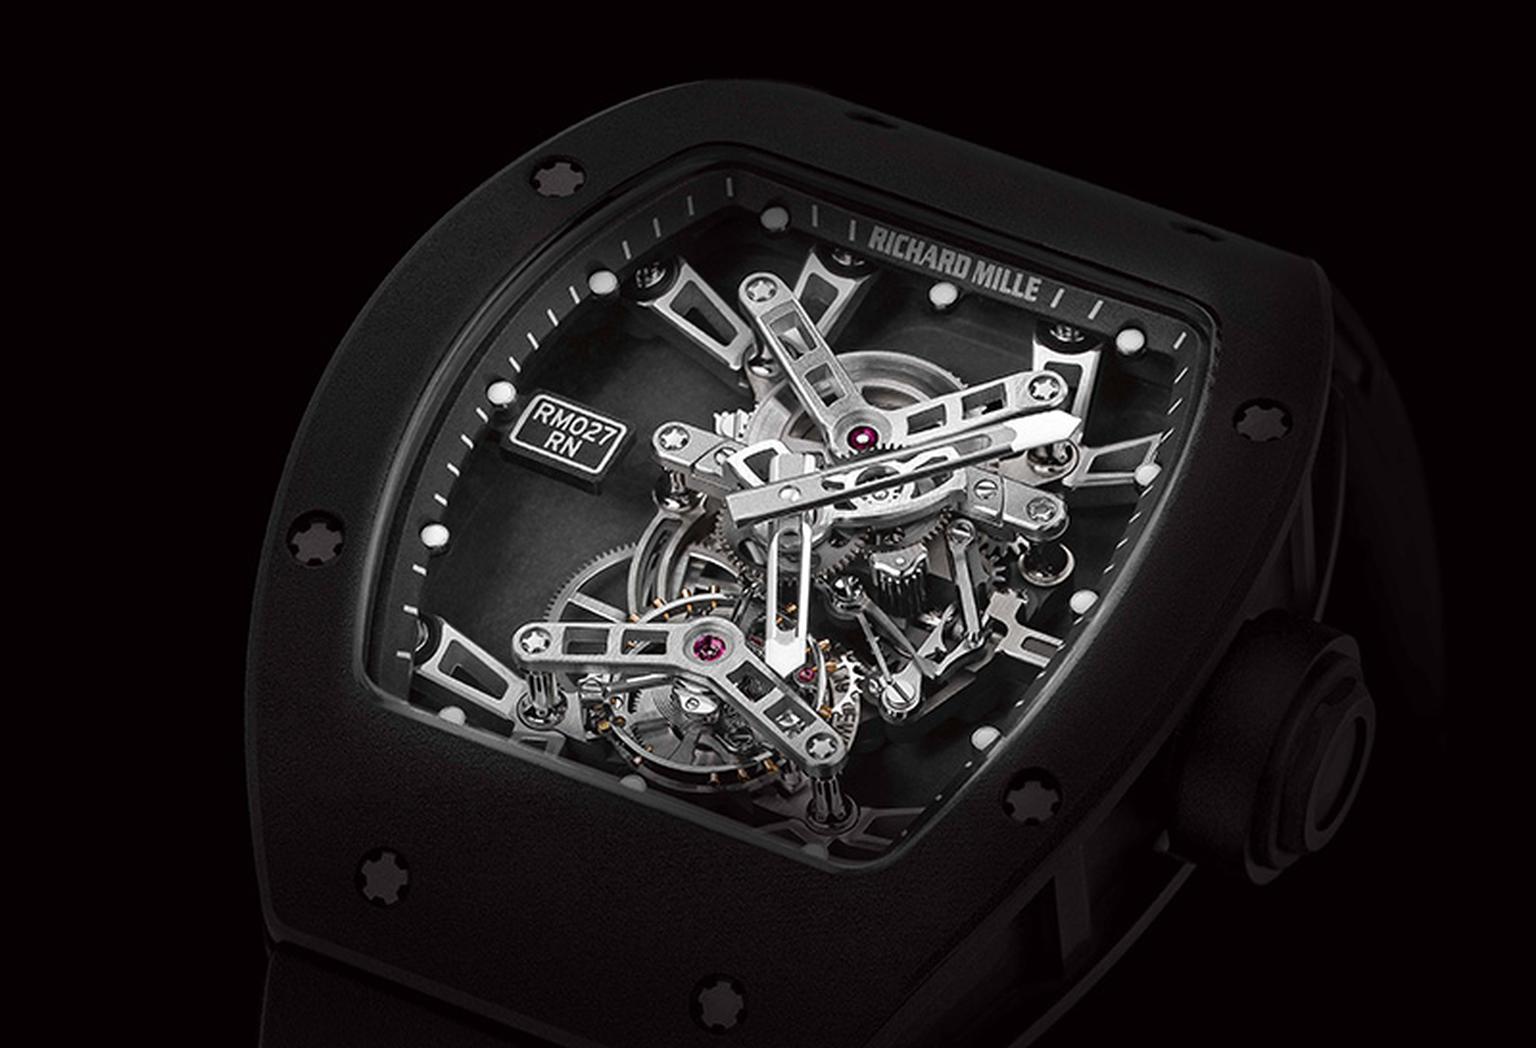 The real story behind Rafael Nadal watch | The Jewellery Editor